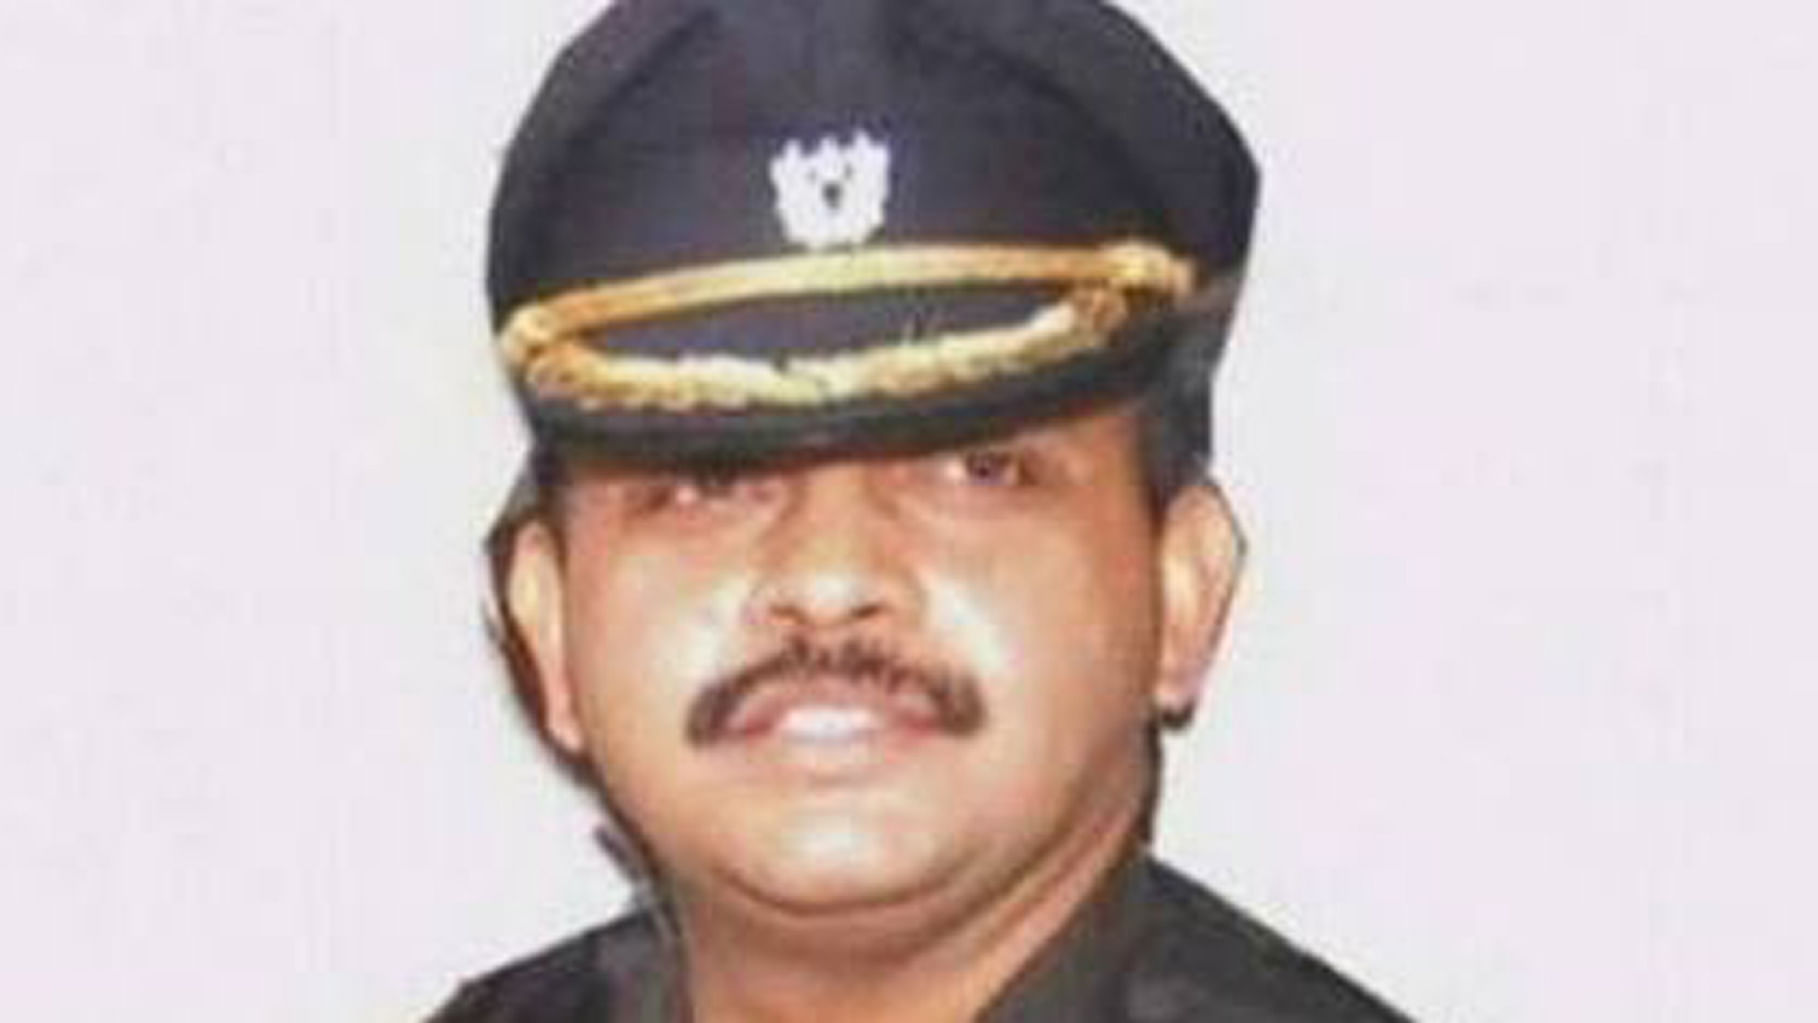 Besides Purohit, 11 others have been arrested connection. (Photo Courtesy: <a href="https://twitter.com/KiranKS/status/722494629887782912">Twitter/Kiran Kumar S</a>)